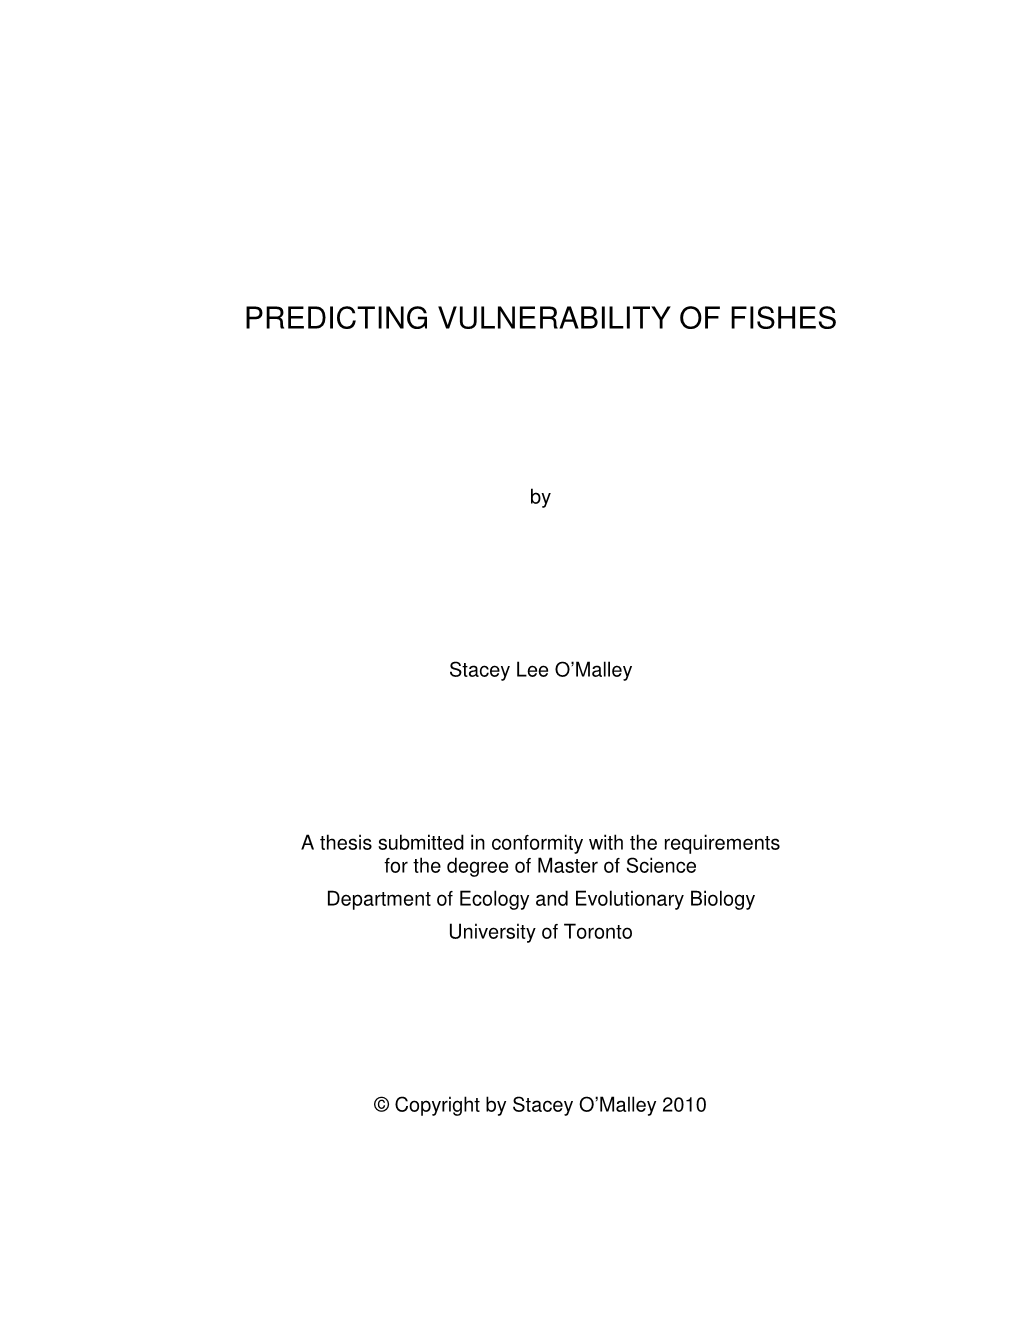 Predicting Vulnerability of Fishes